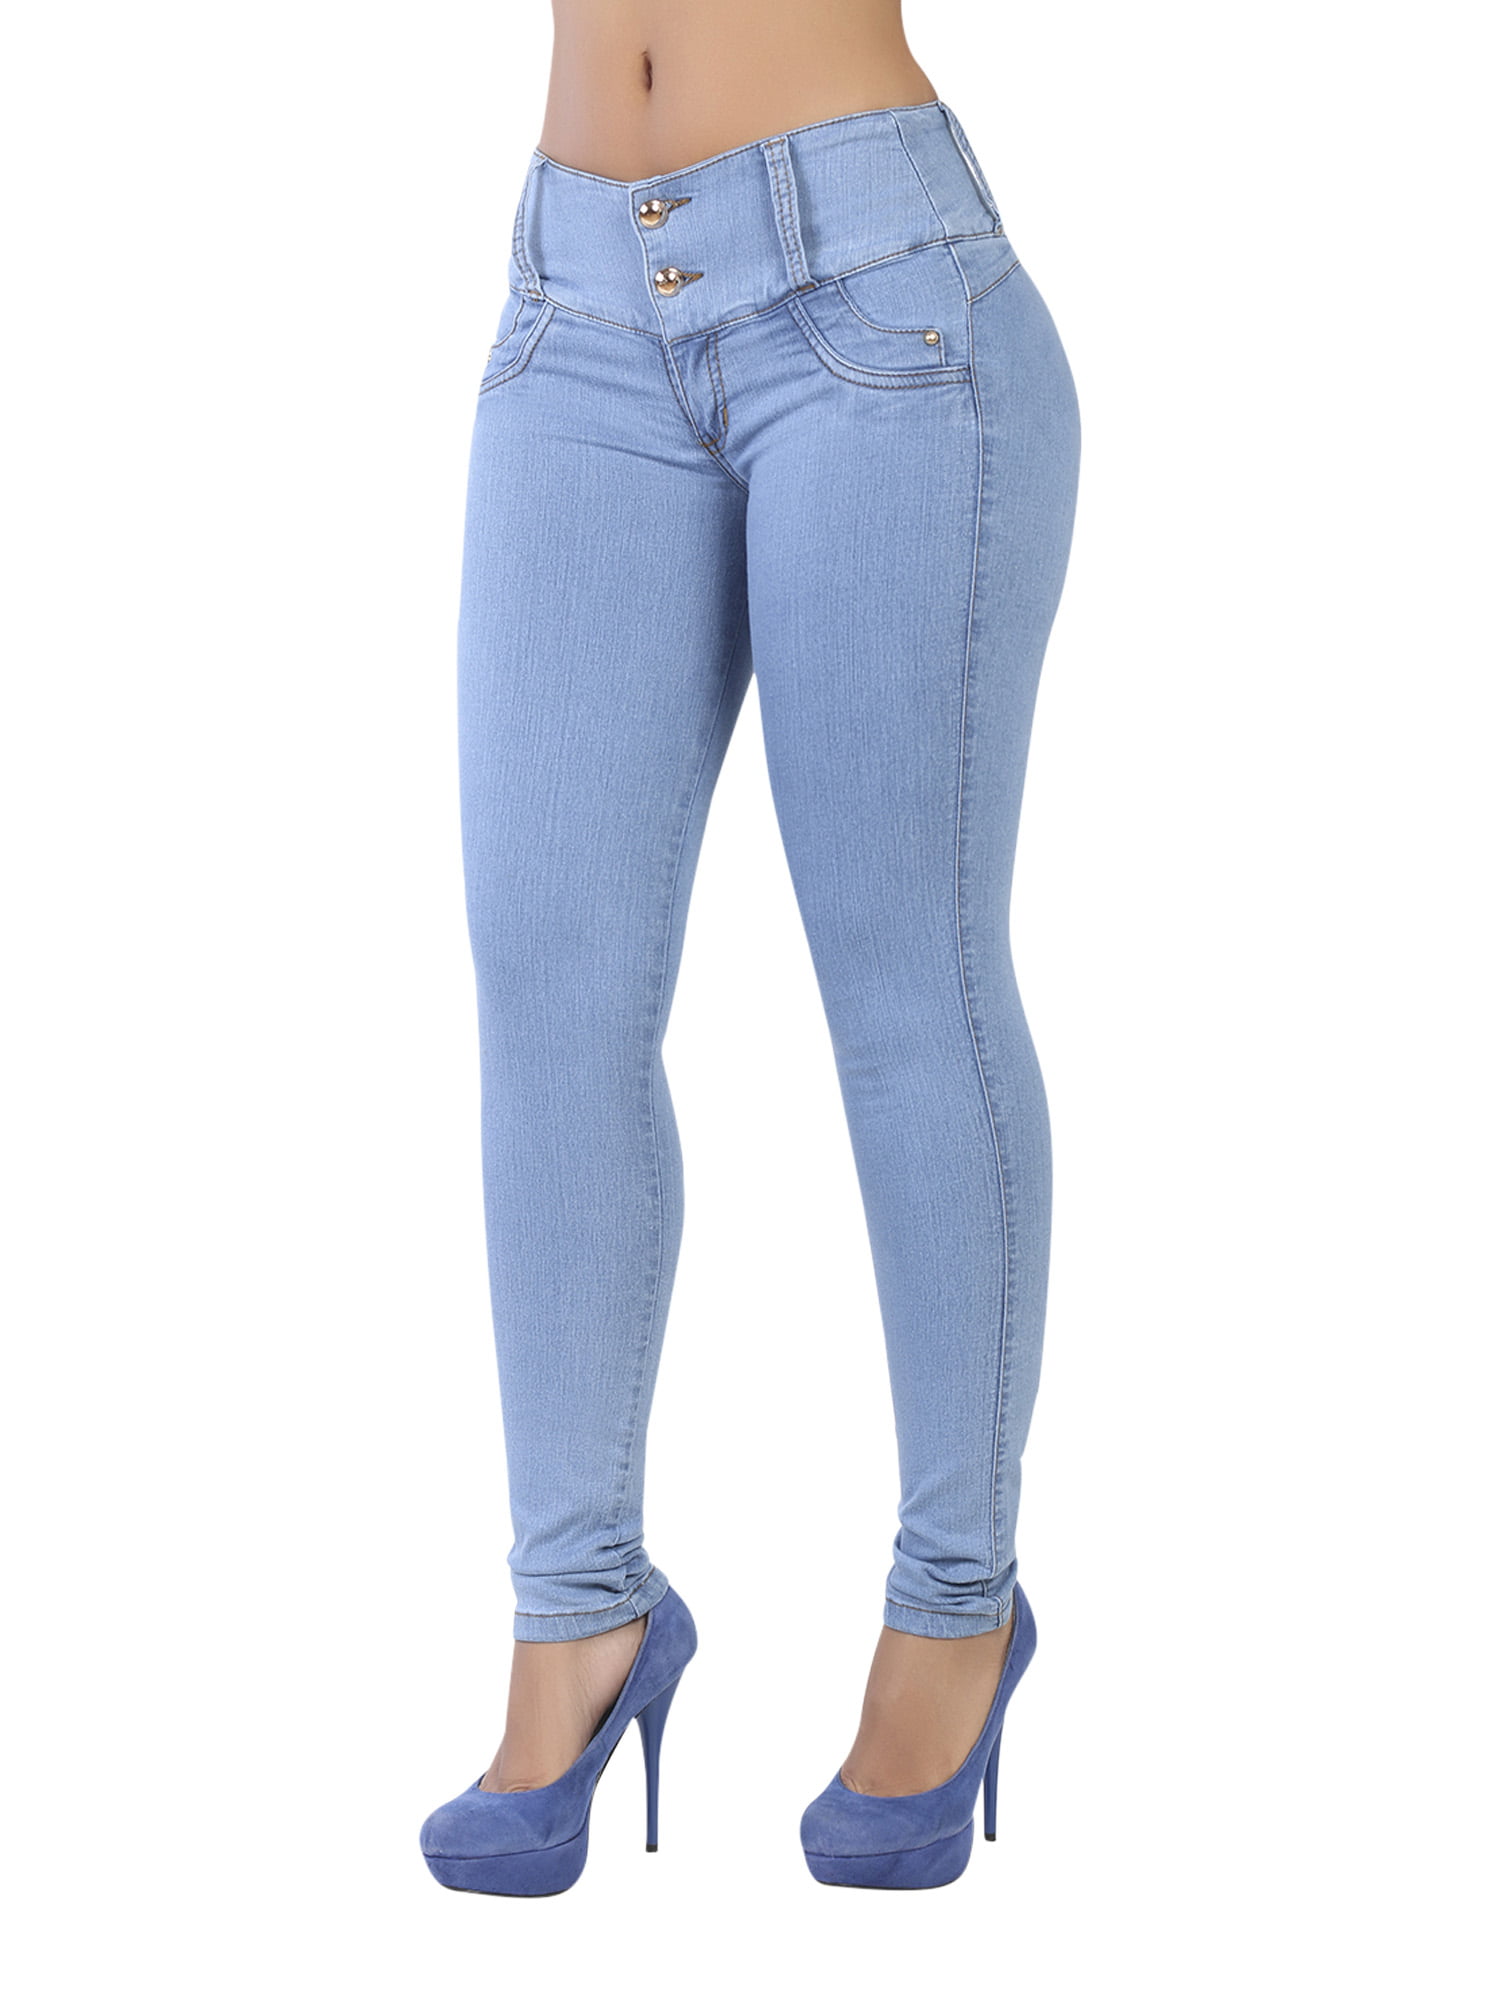 Curvify 764 Women's Butt-Lifting Skinny Jeans  High-Rise Waist, Brazilian  Style FADED WASHED 3 